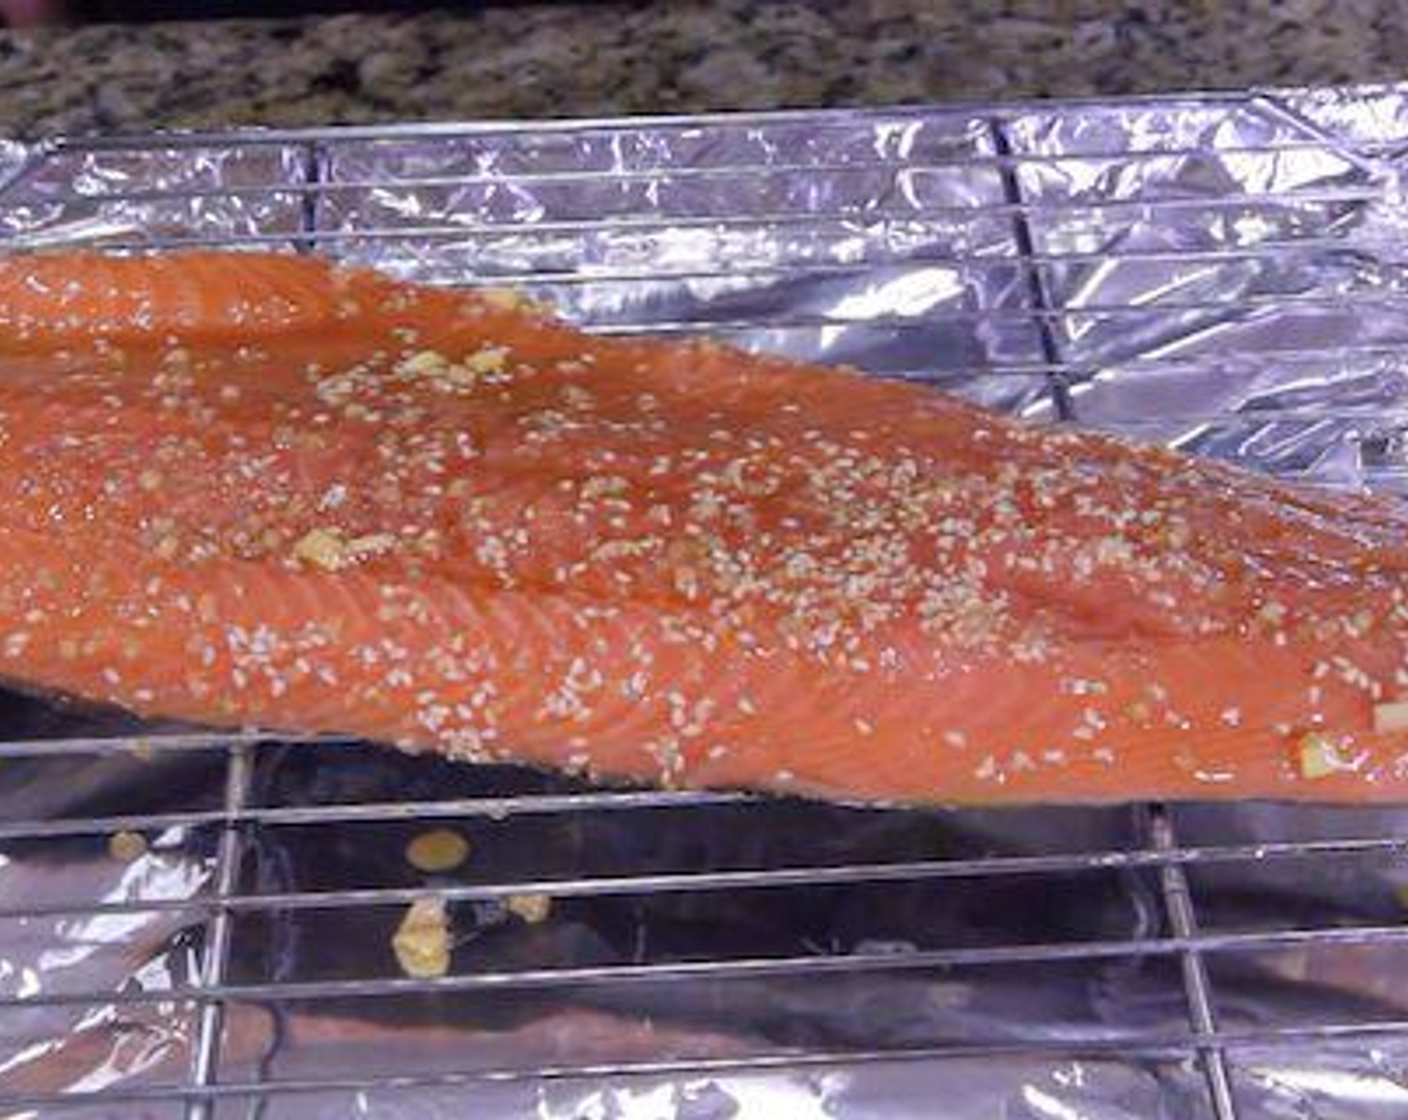 step 2 Remove salmon with kitchen tongs and place directly on a foil-lined wire rack. Sprinkle with a little bit of salt and pepper, then place directly under the broiler. Cook for 10-12 minutes depending on the salmon’s thickness, until flesh is opaque and easily breaks apart with a fork. Halfway through, brush the salmon with Honey (1/4 cup).